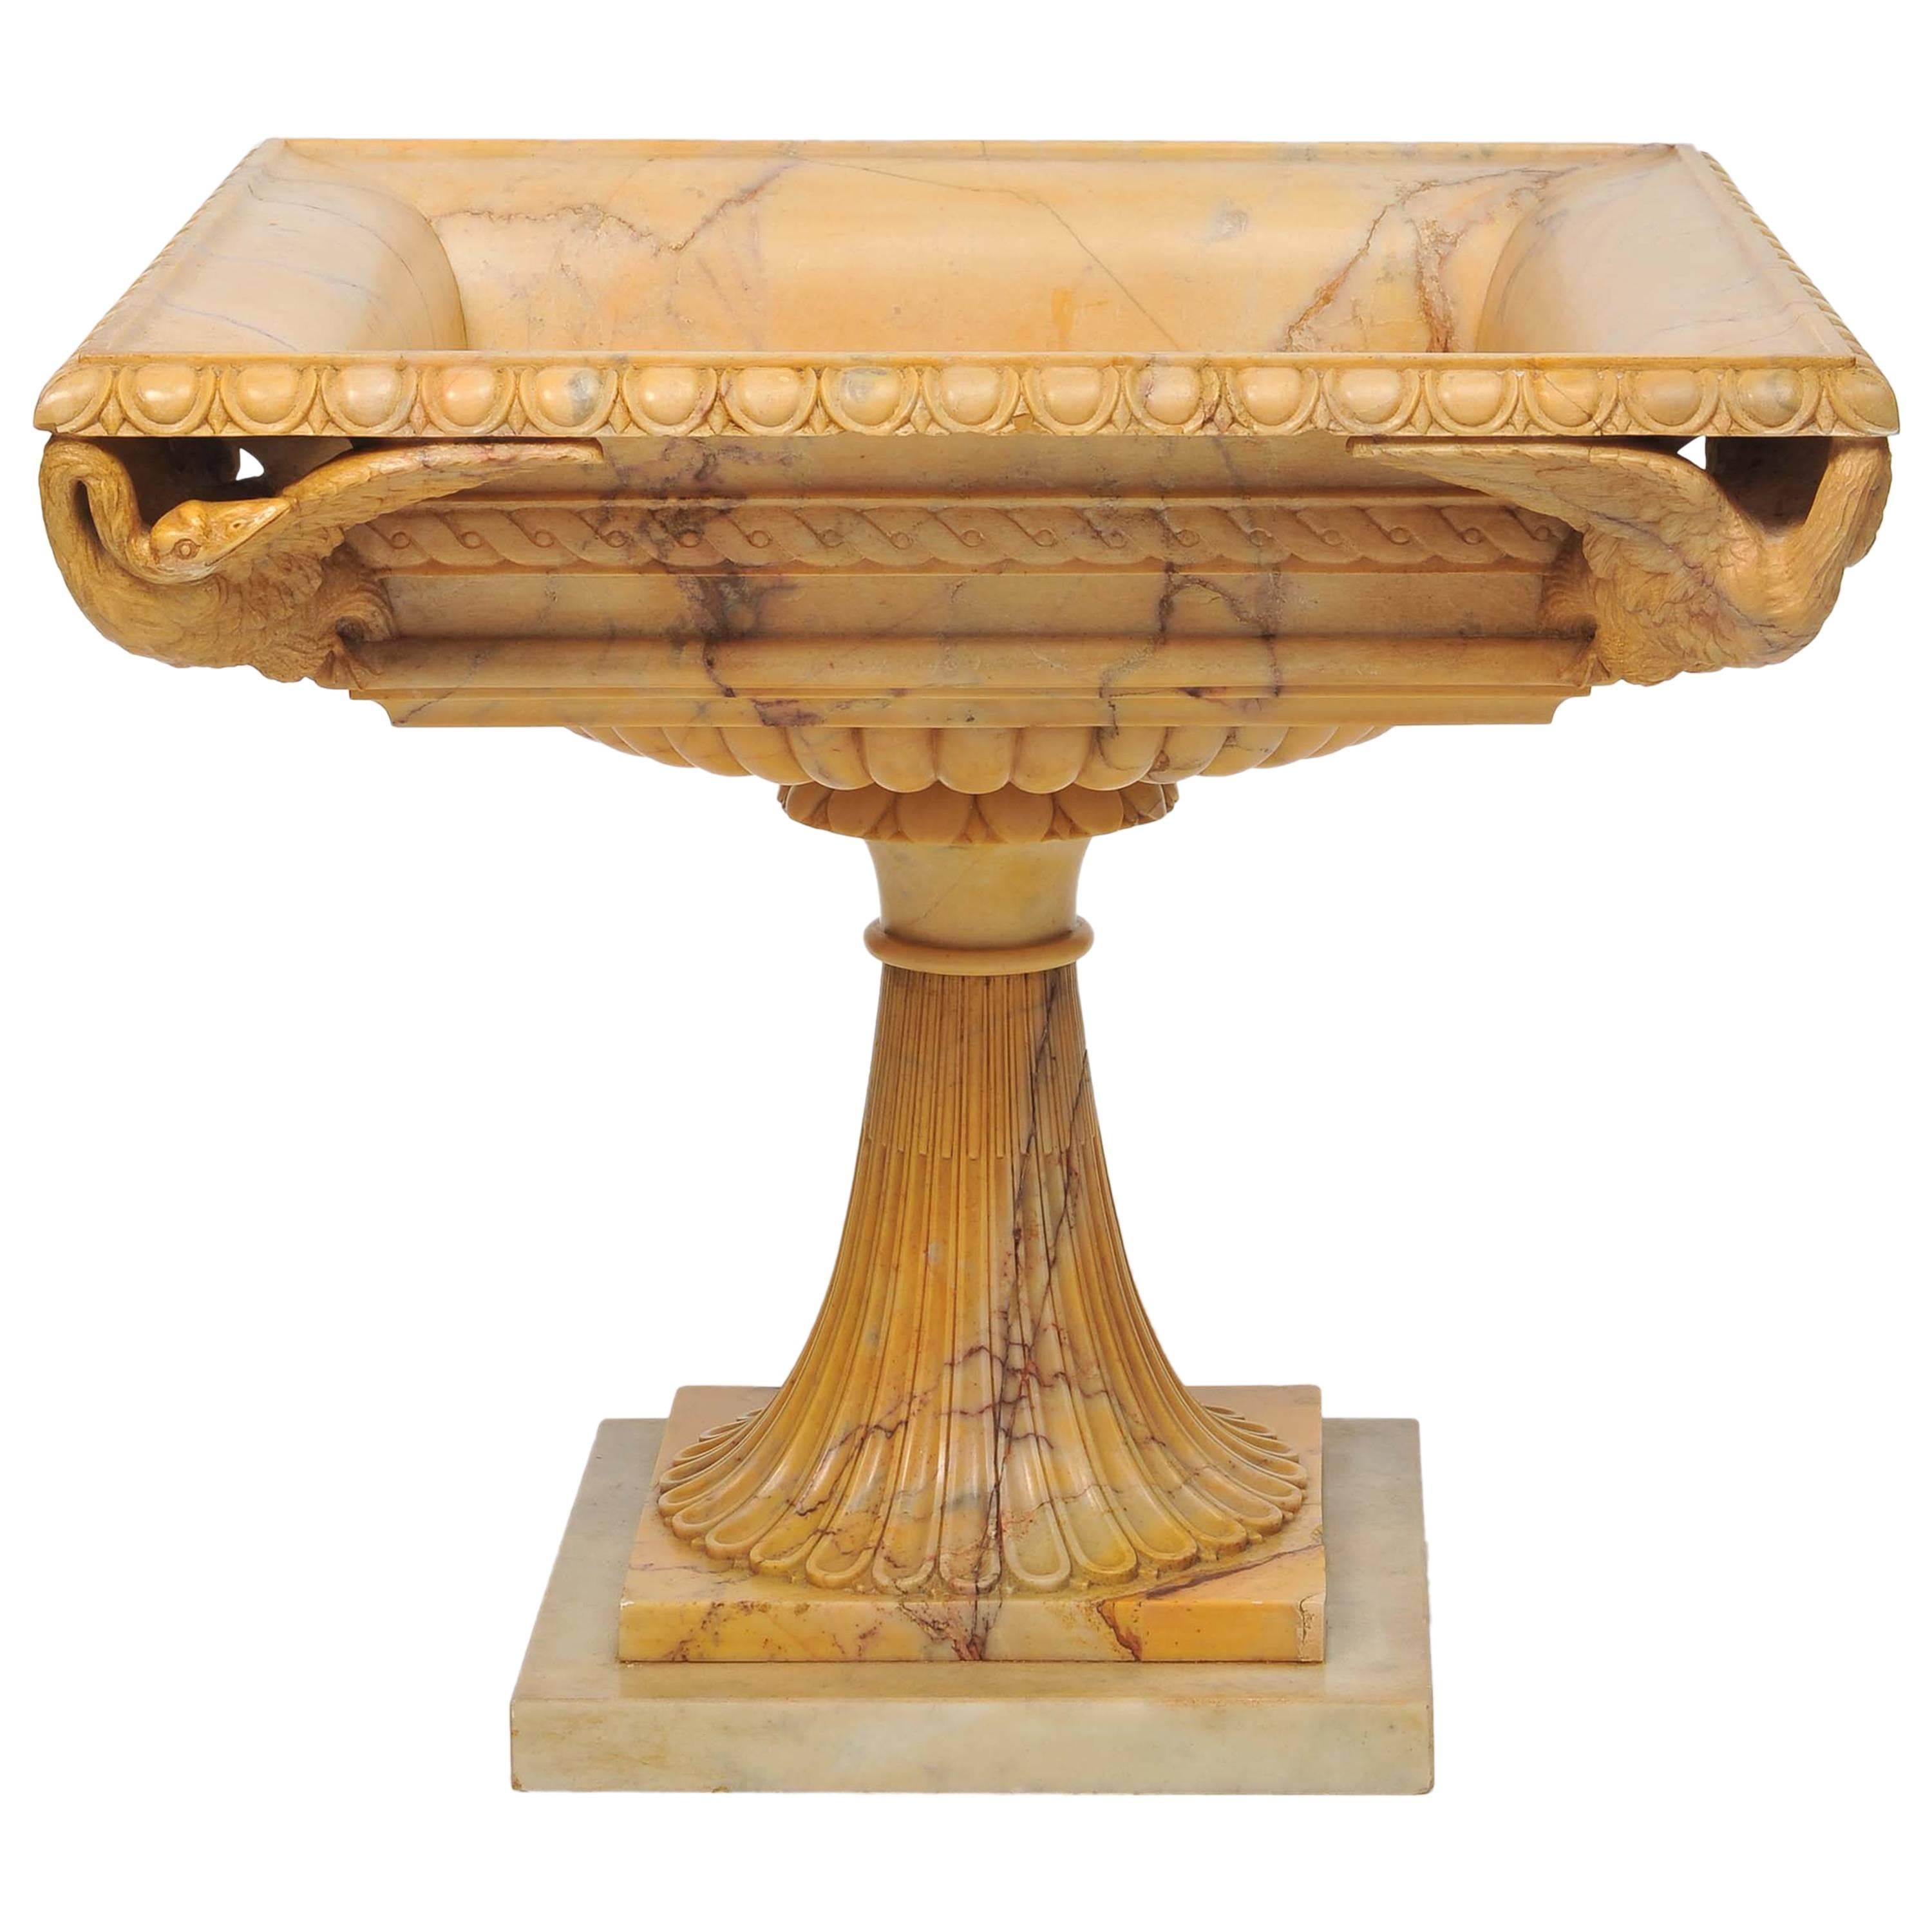 Early 19th Century Grand Tour Tazza in Giallo Antico Marble